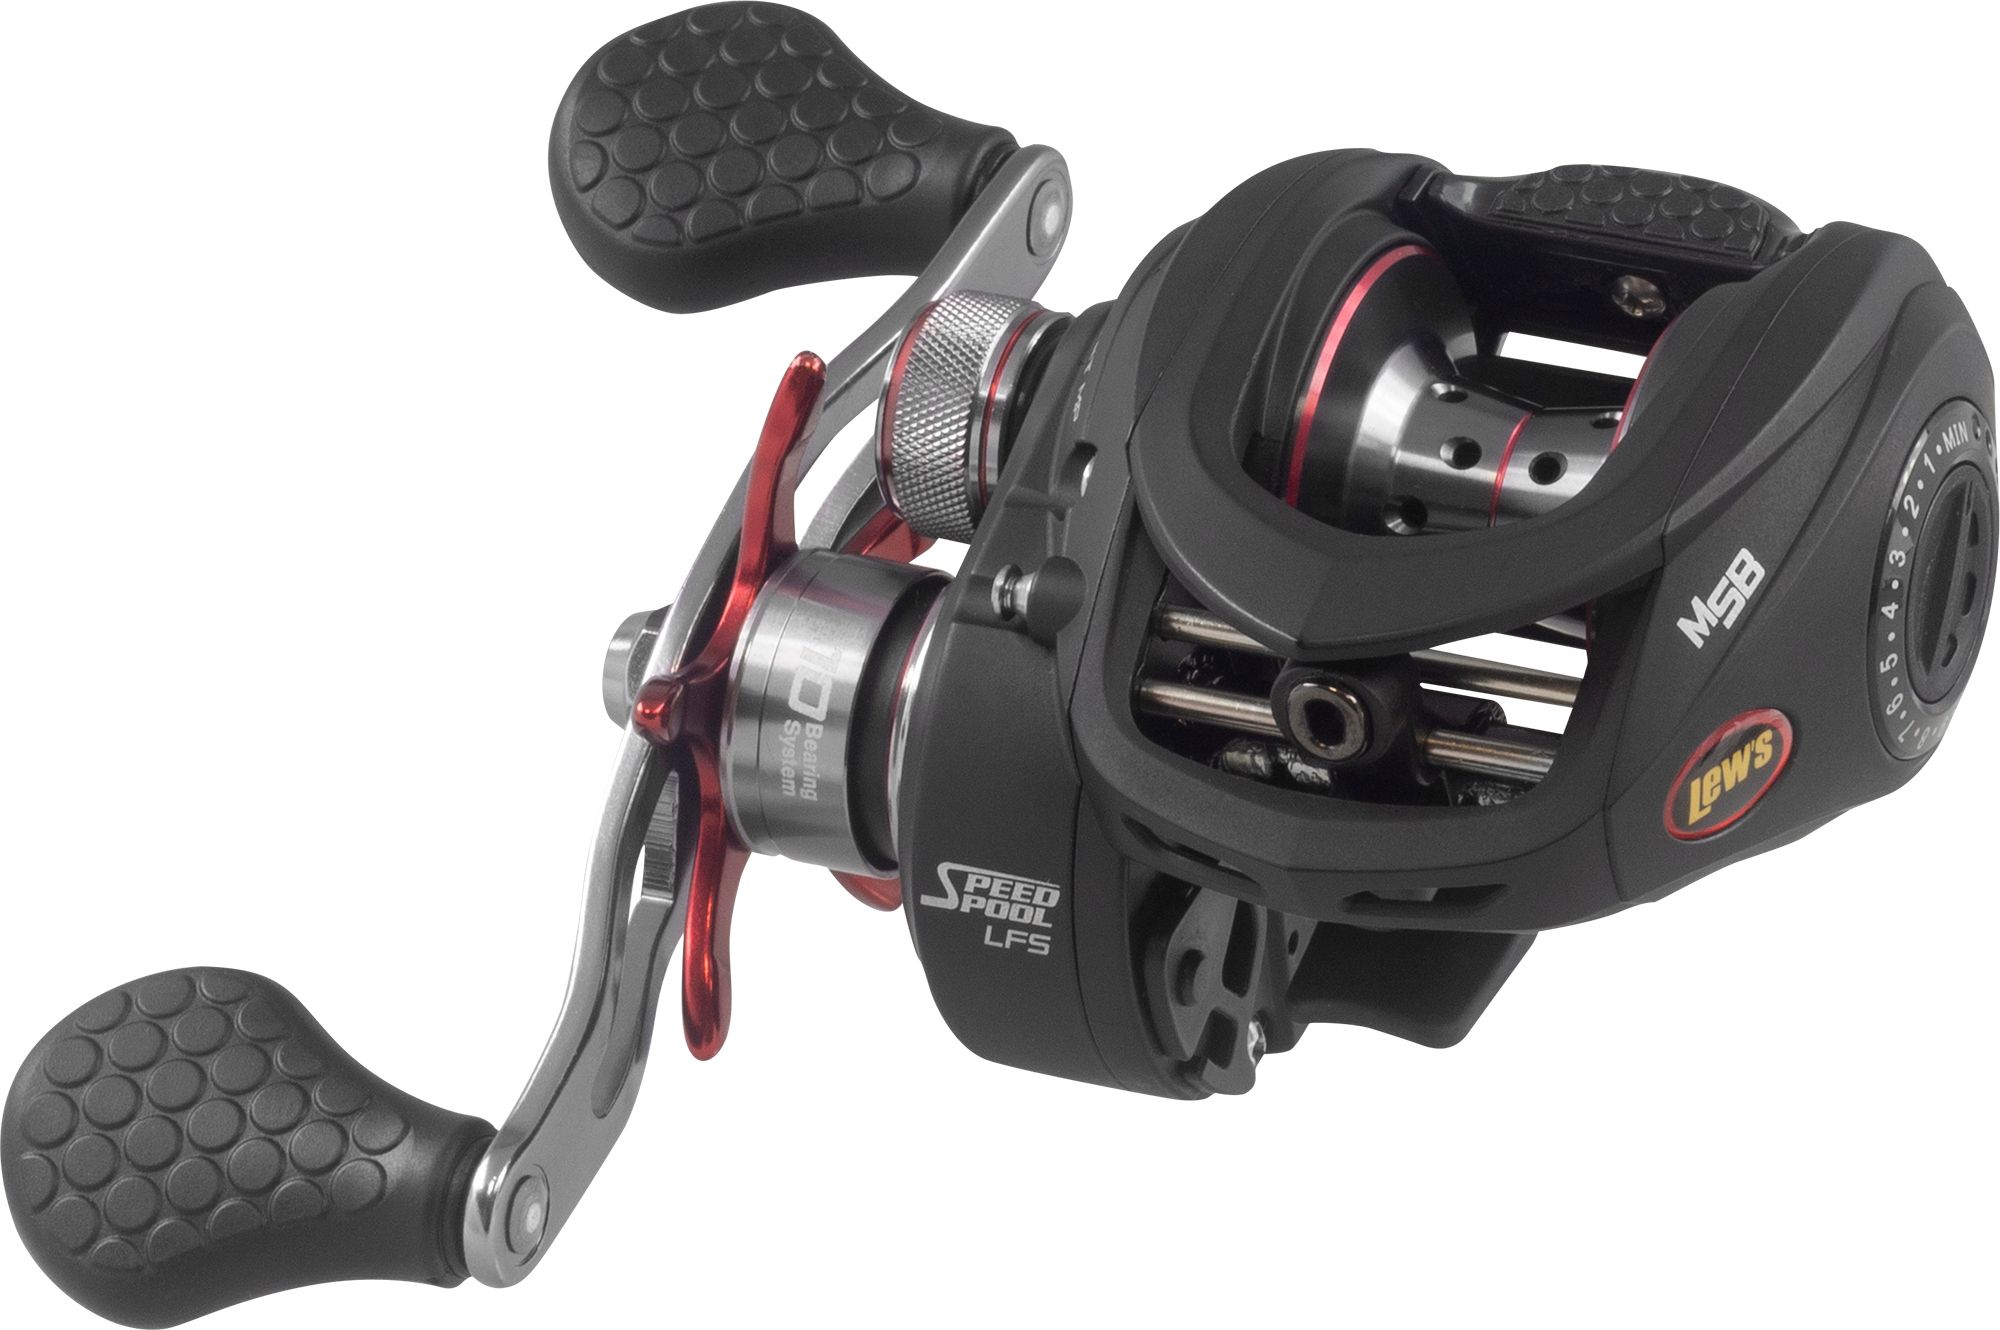 Photos - Other for Fishing Lew's Tournament MP Speed Spool LFS Baitcasting Reel 19LEWUTRNMNTMPSPDREE